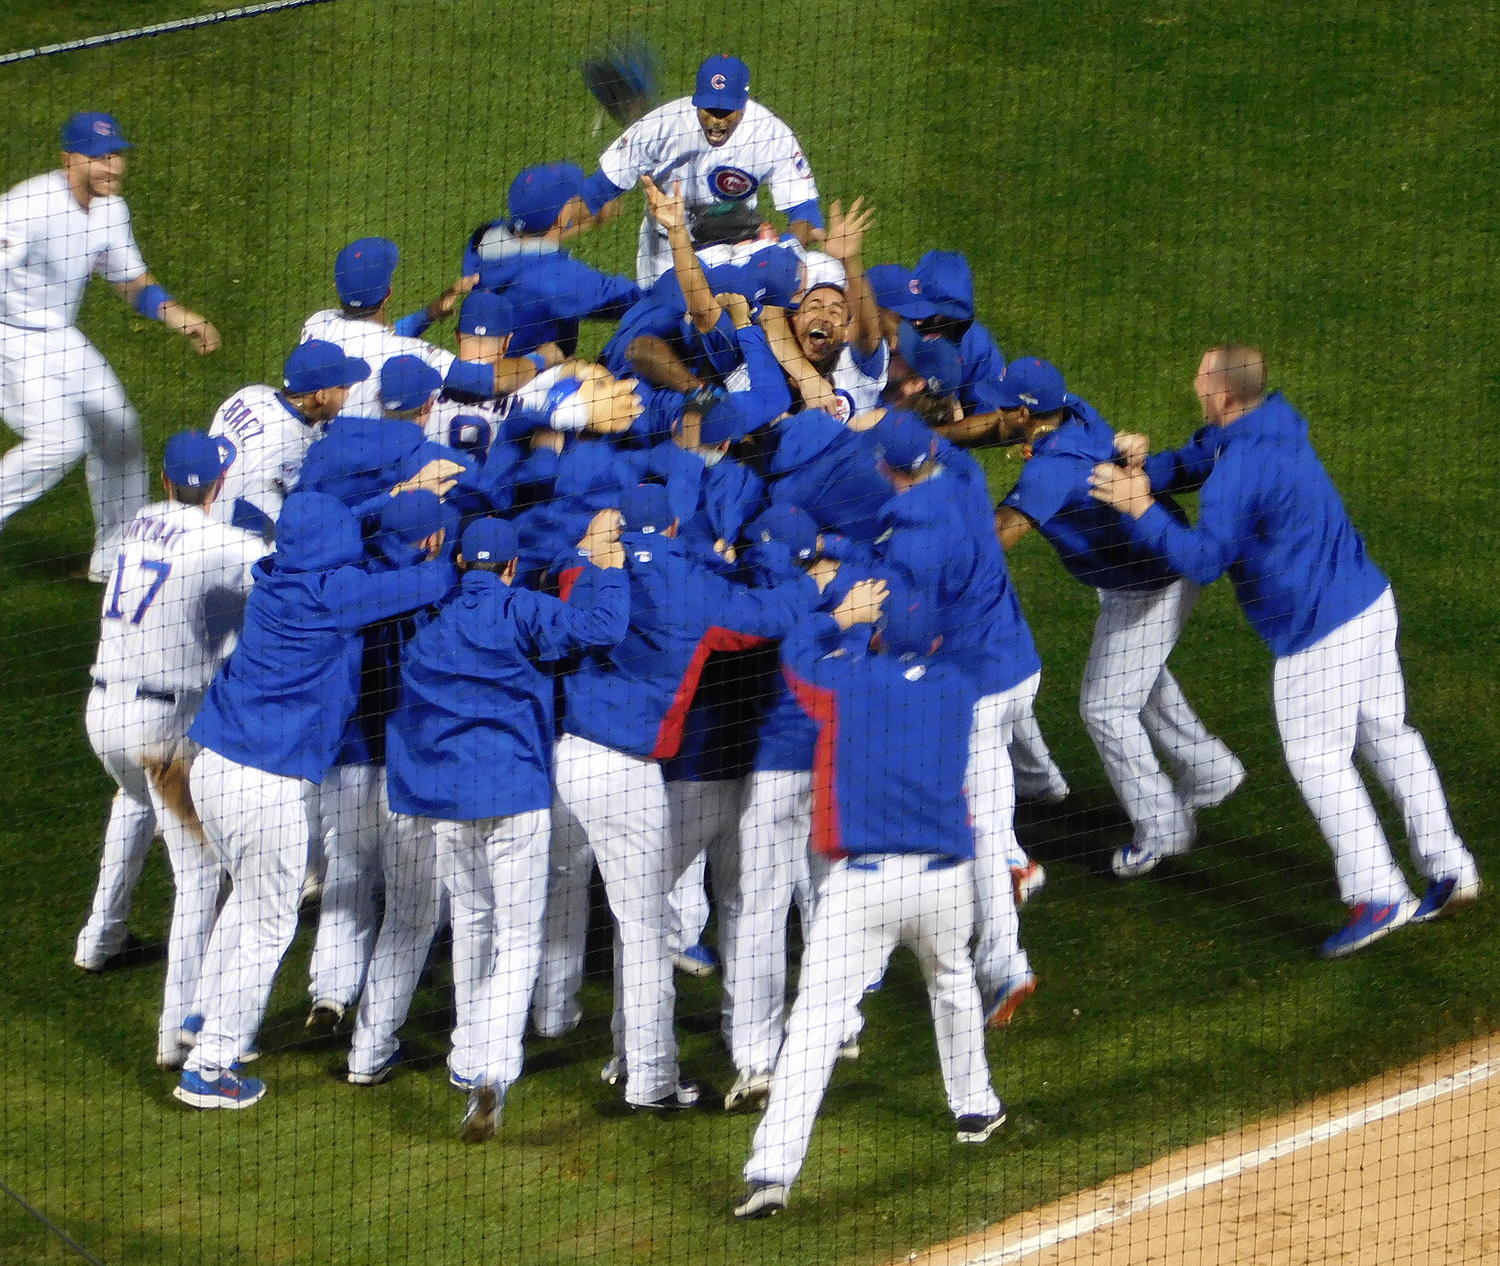 Cubs to celebrate division title, fans hope hope for big things this  postseason - Chronicle Media